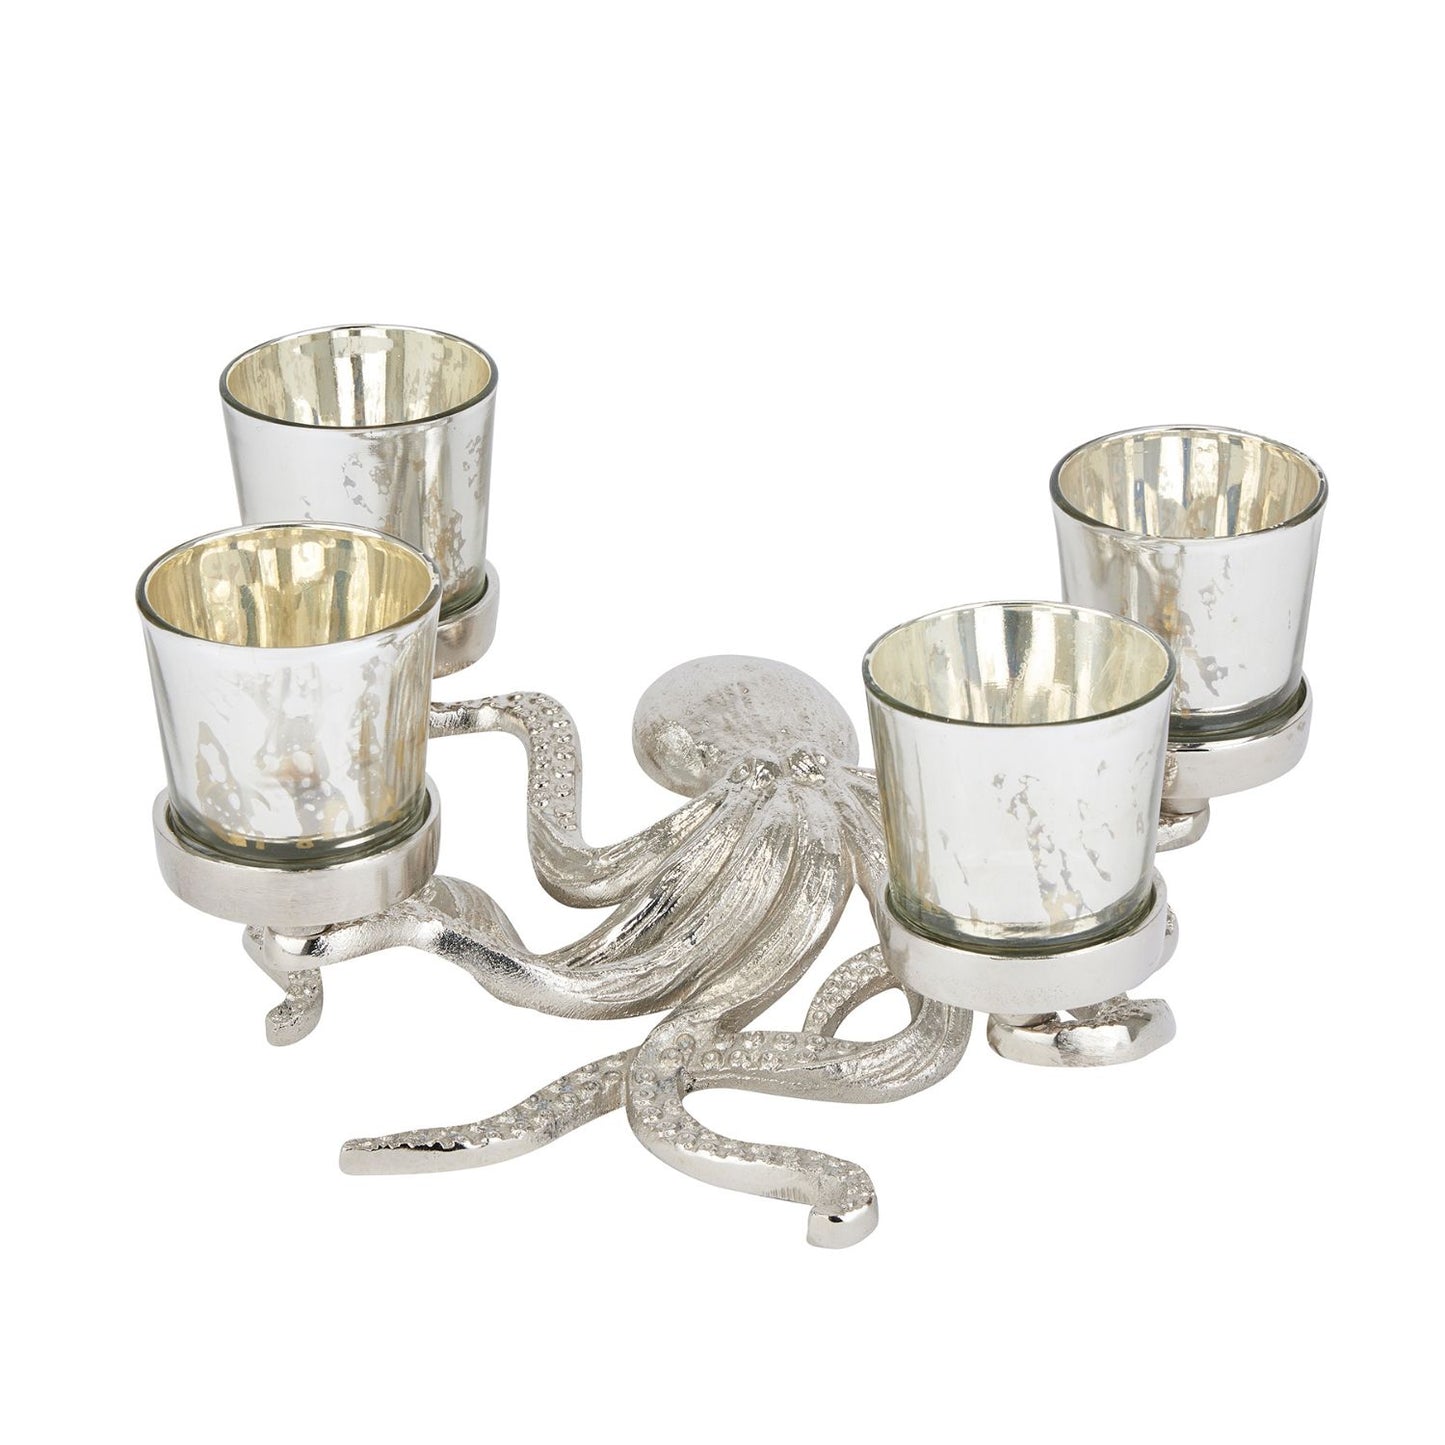 Silver Octopus Tealight Candle Holder with 4 Glass Votives